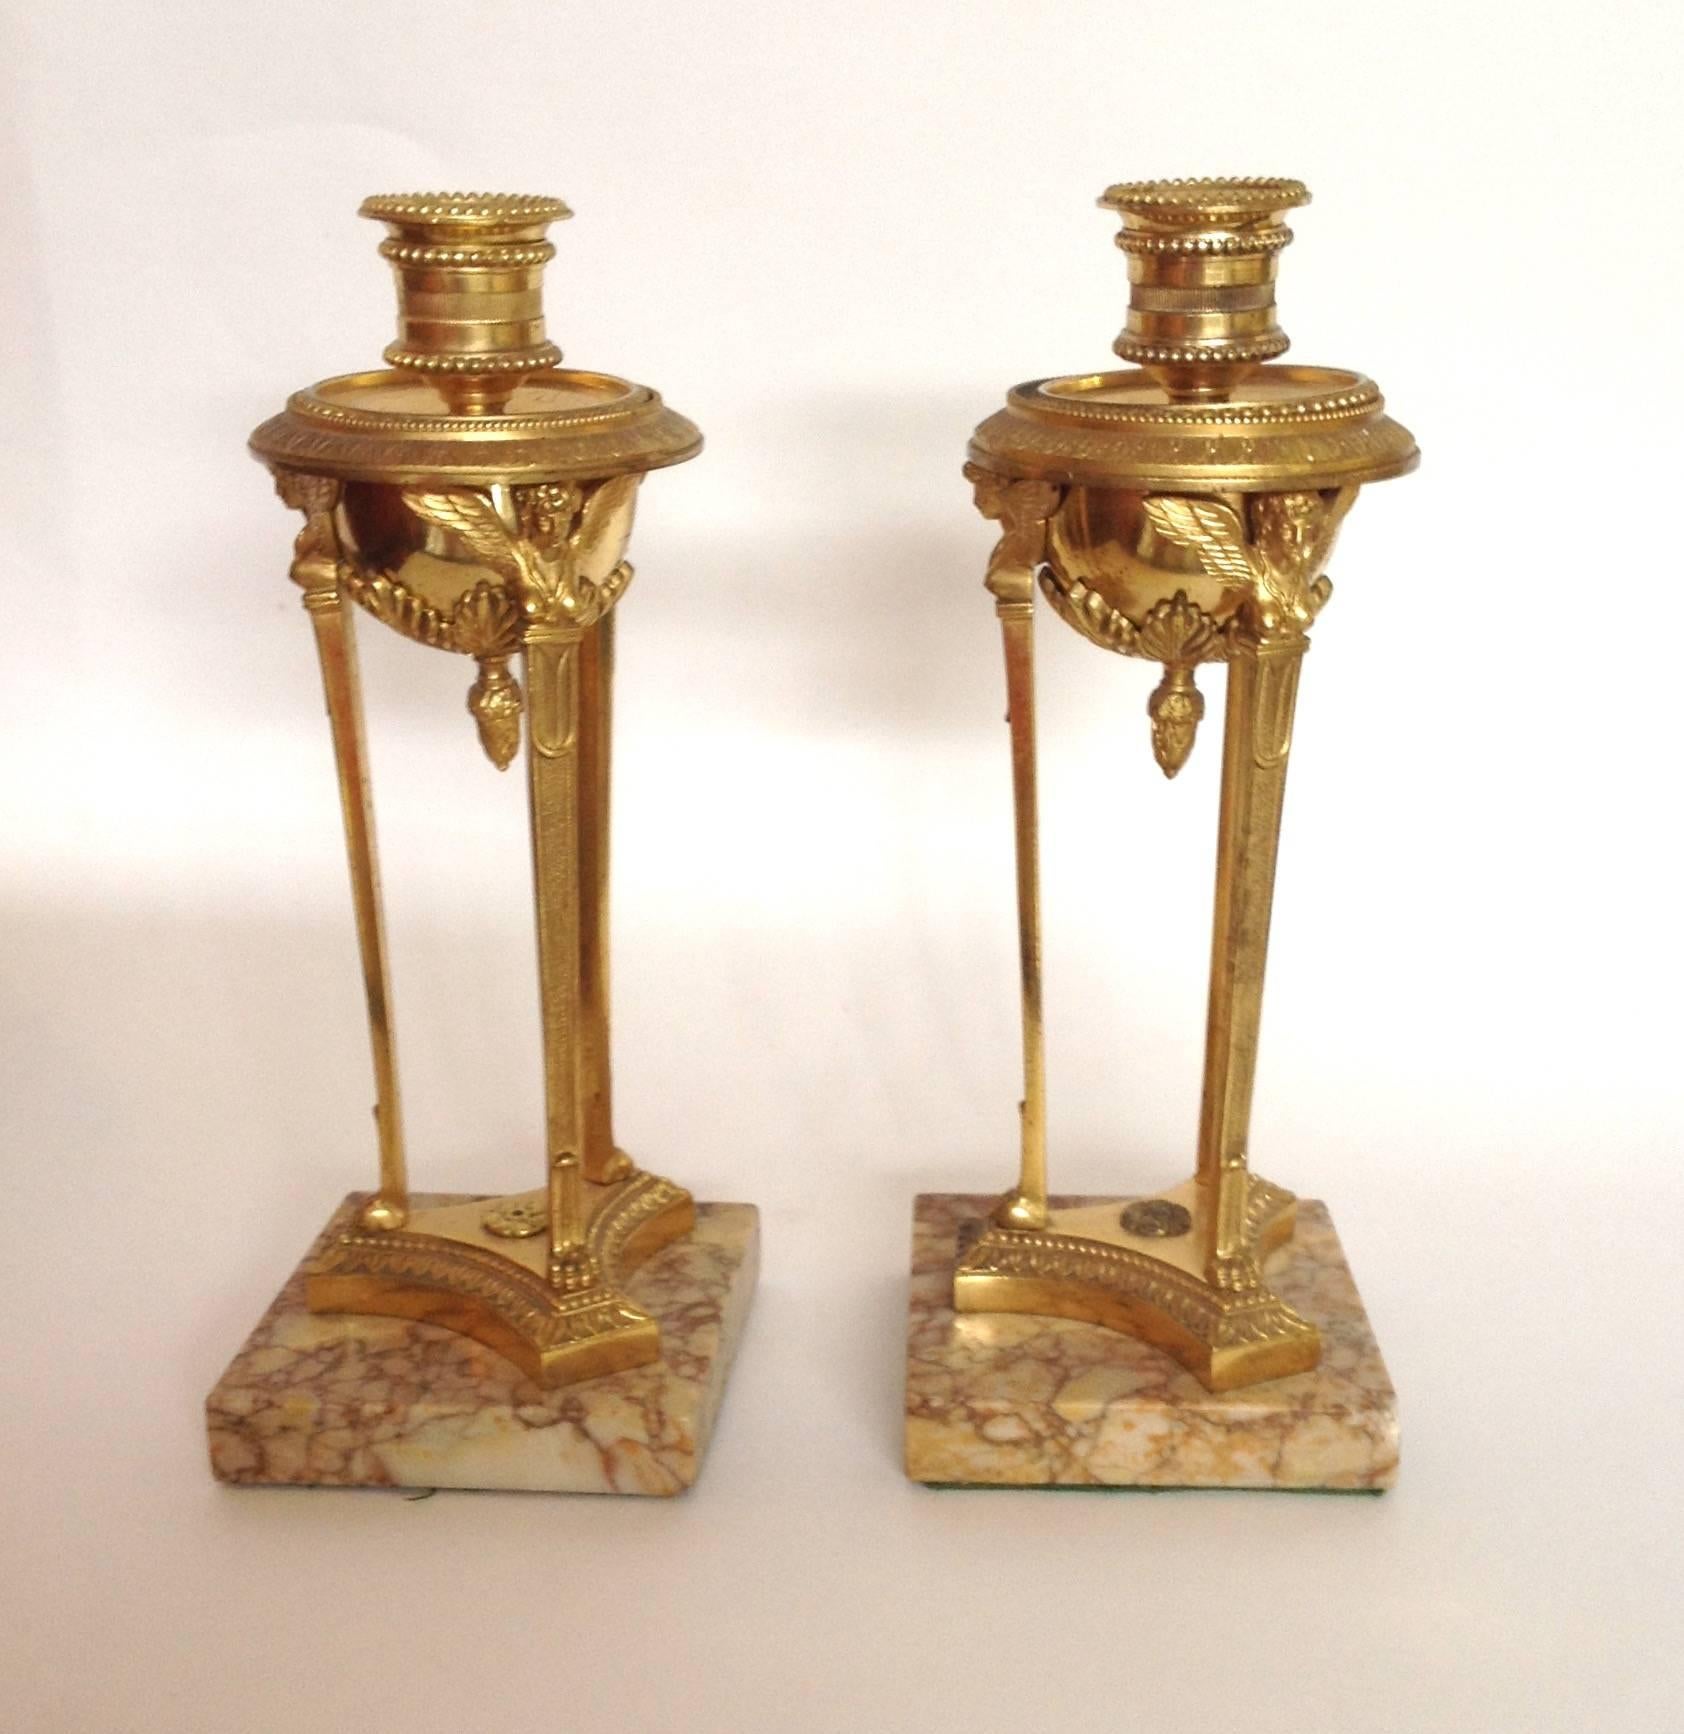 French Empire Period Gilt Bronze Sienna Marble Atheniennes or Candlesticks For Sale